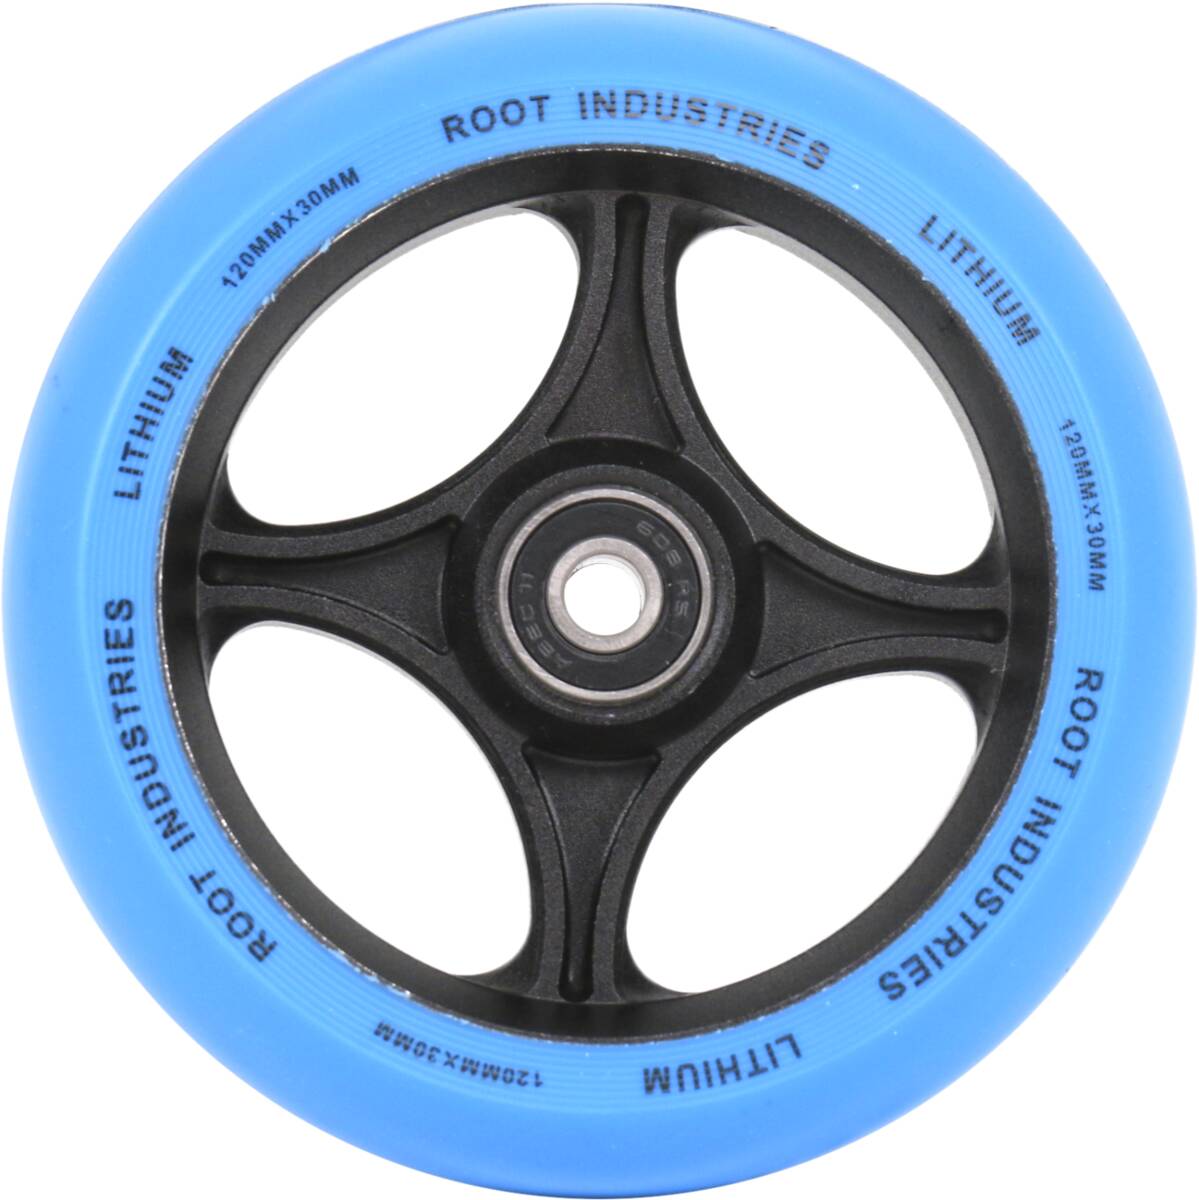 An image of Root Industries Lithium 120mm Scooter Wheel - Blue